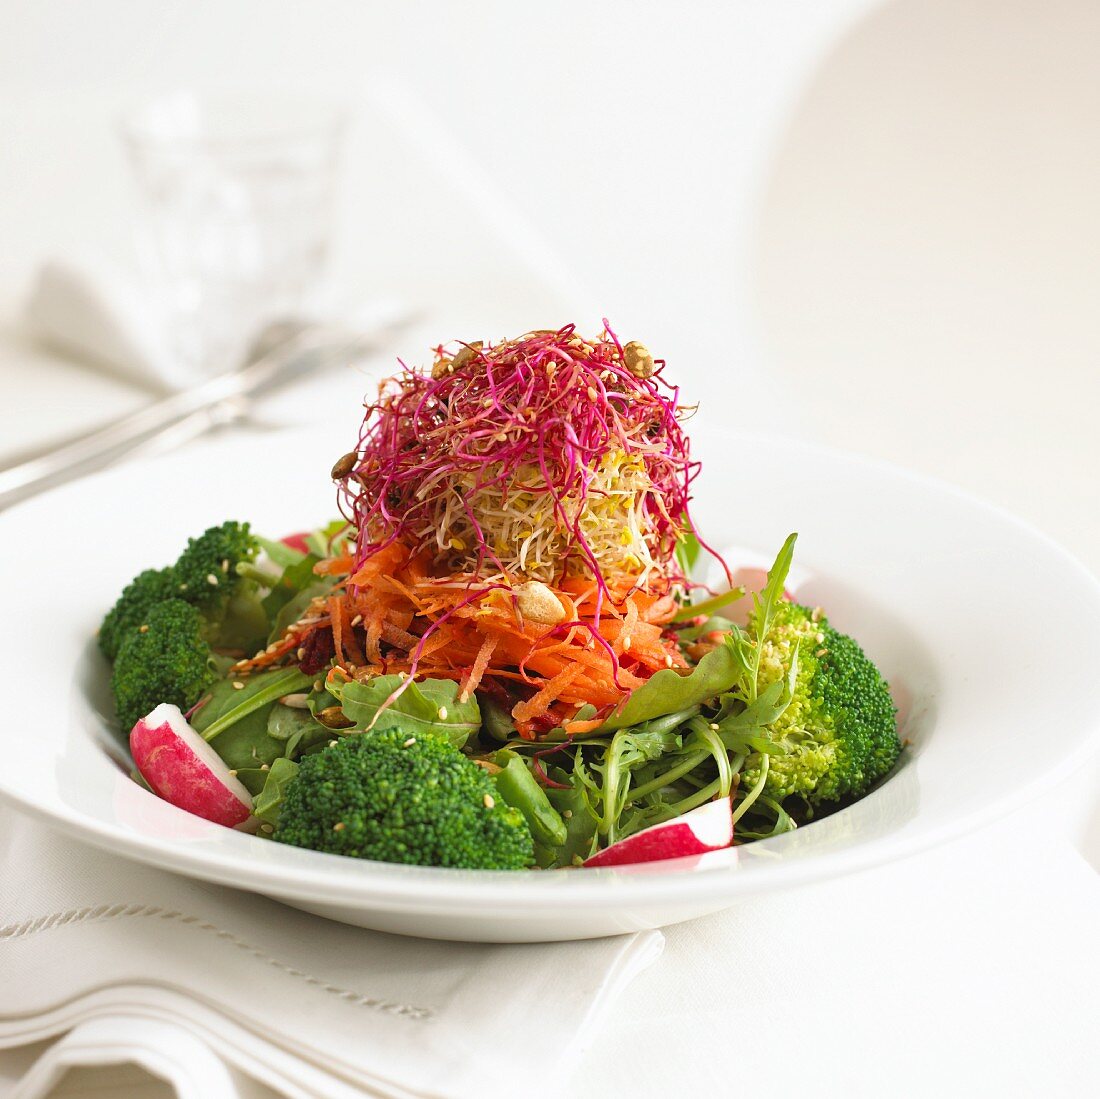 Vegetable salad with broccoli, carrots and bean sprouts